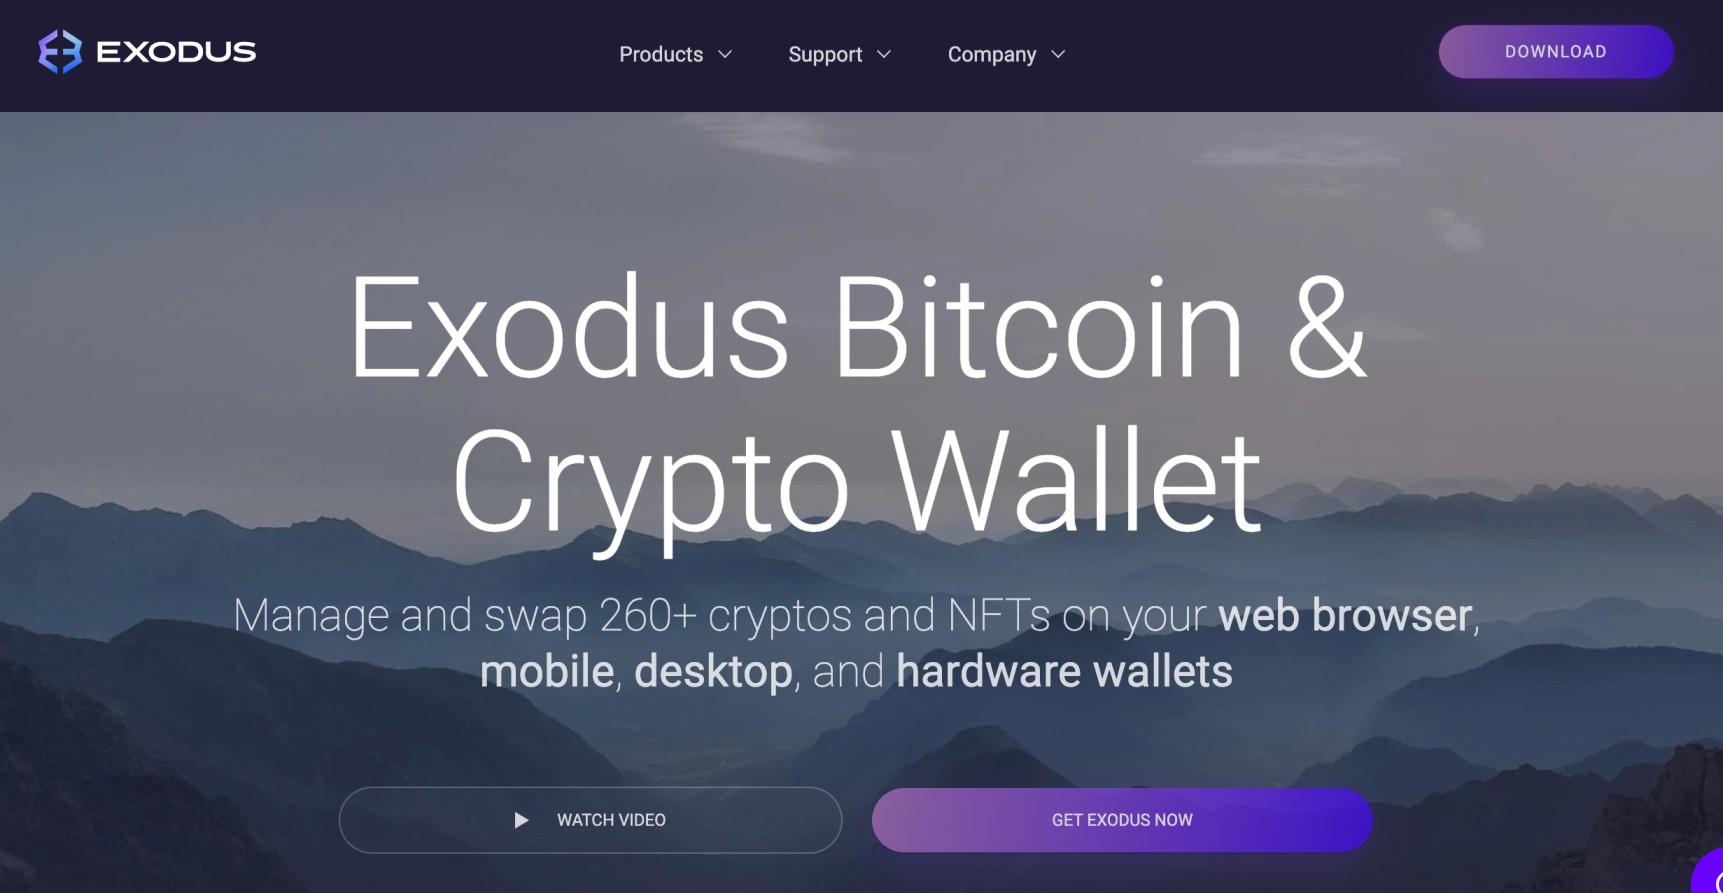 What is Exodus?